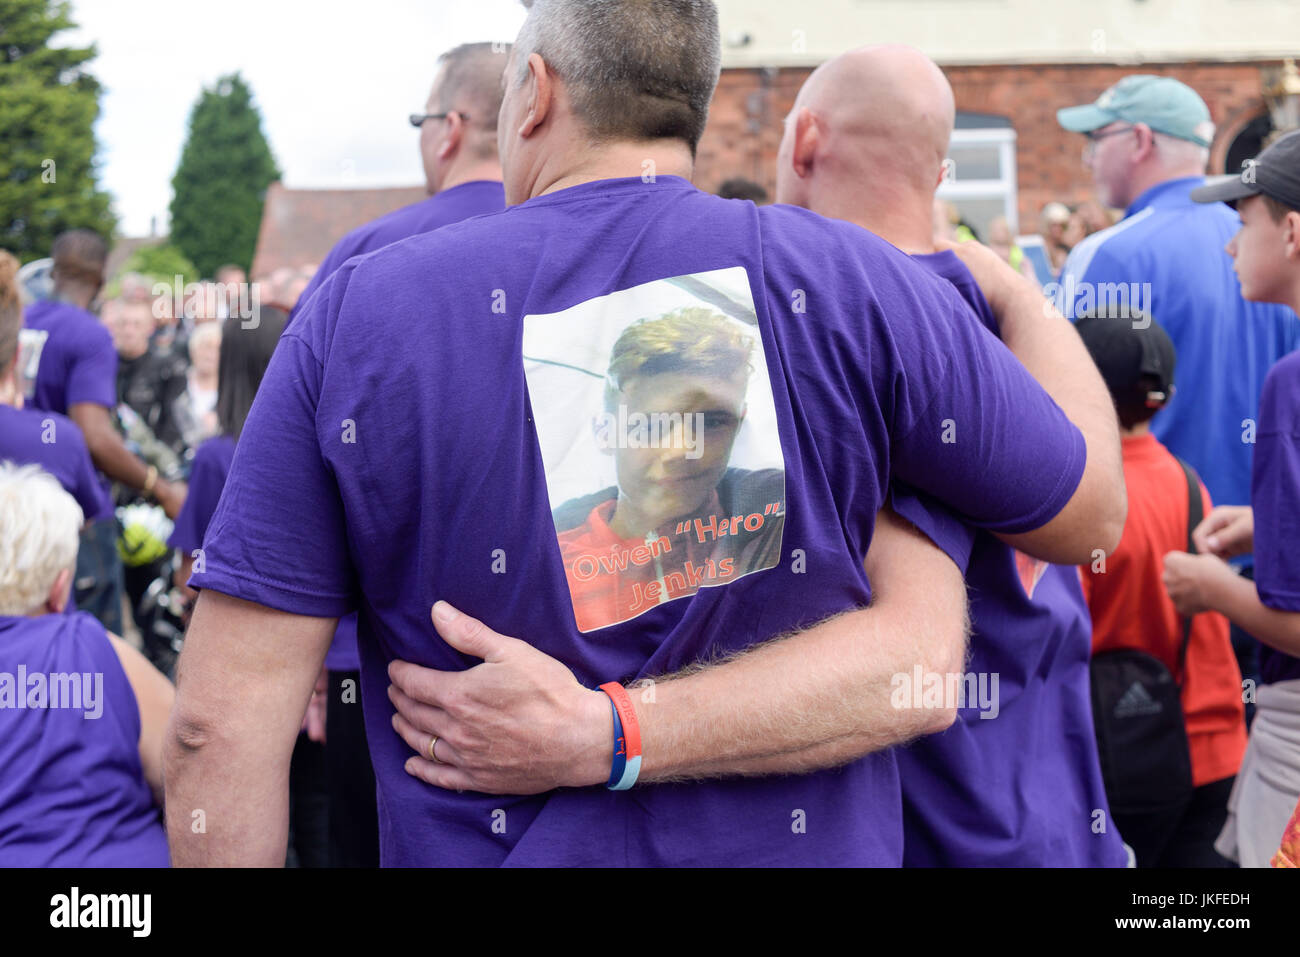 Beeston, Nottinghamshire, UK. 23rd July 2017. Nottinghamshire bikers’ group, Nottz Bikerz held a charity motorcycle run for Owen Jenkins.Owen drowned in the river Trent trying to save a young girl who was in trouble in the water.Thousands of motorcyclist turn up along with members of the public and Owens family members.Owen's family lead parade all wearing purple his favourite colour. Credit: Ian Francis/Alamy Live News Stock Photo